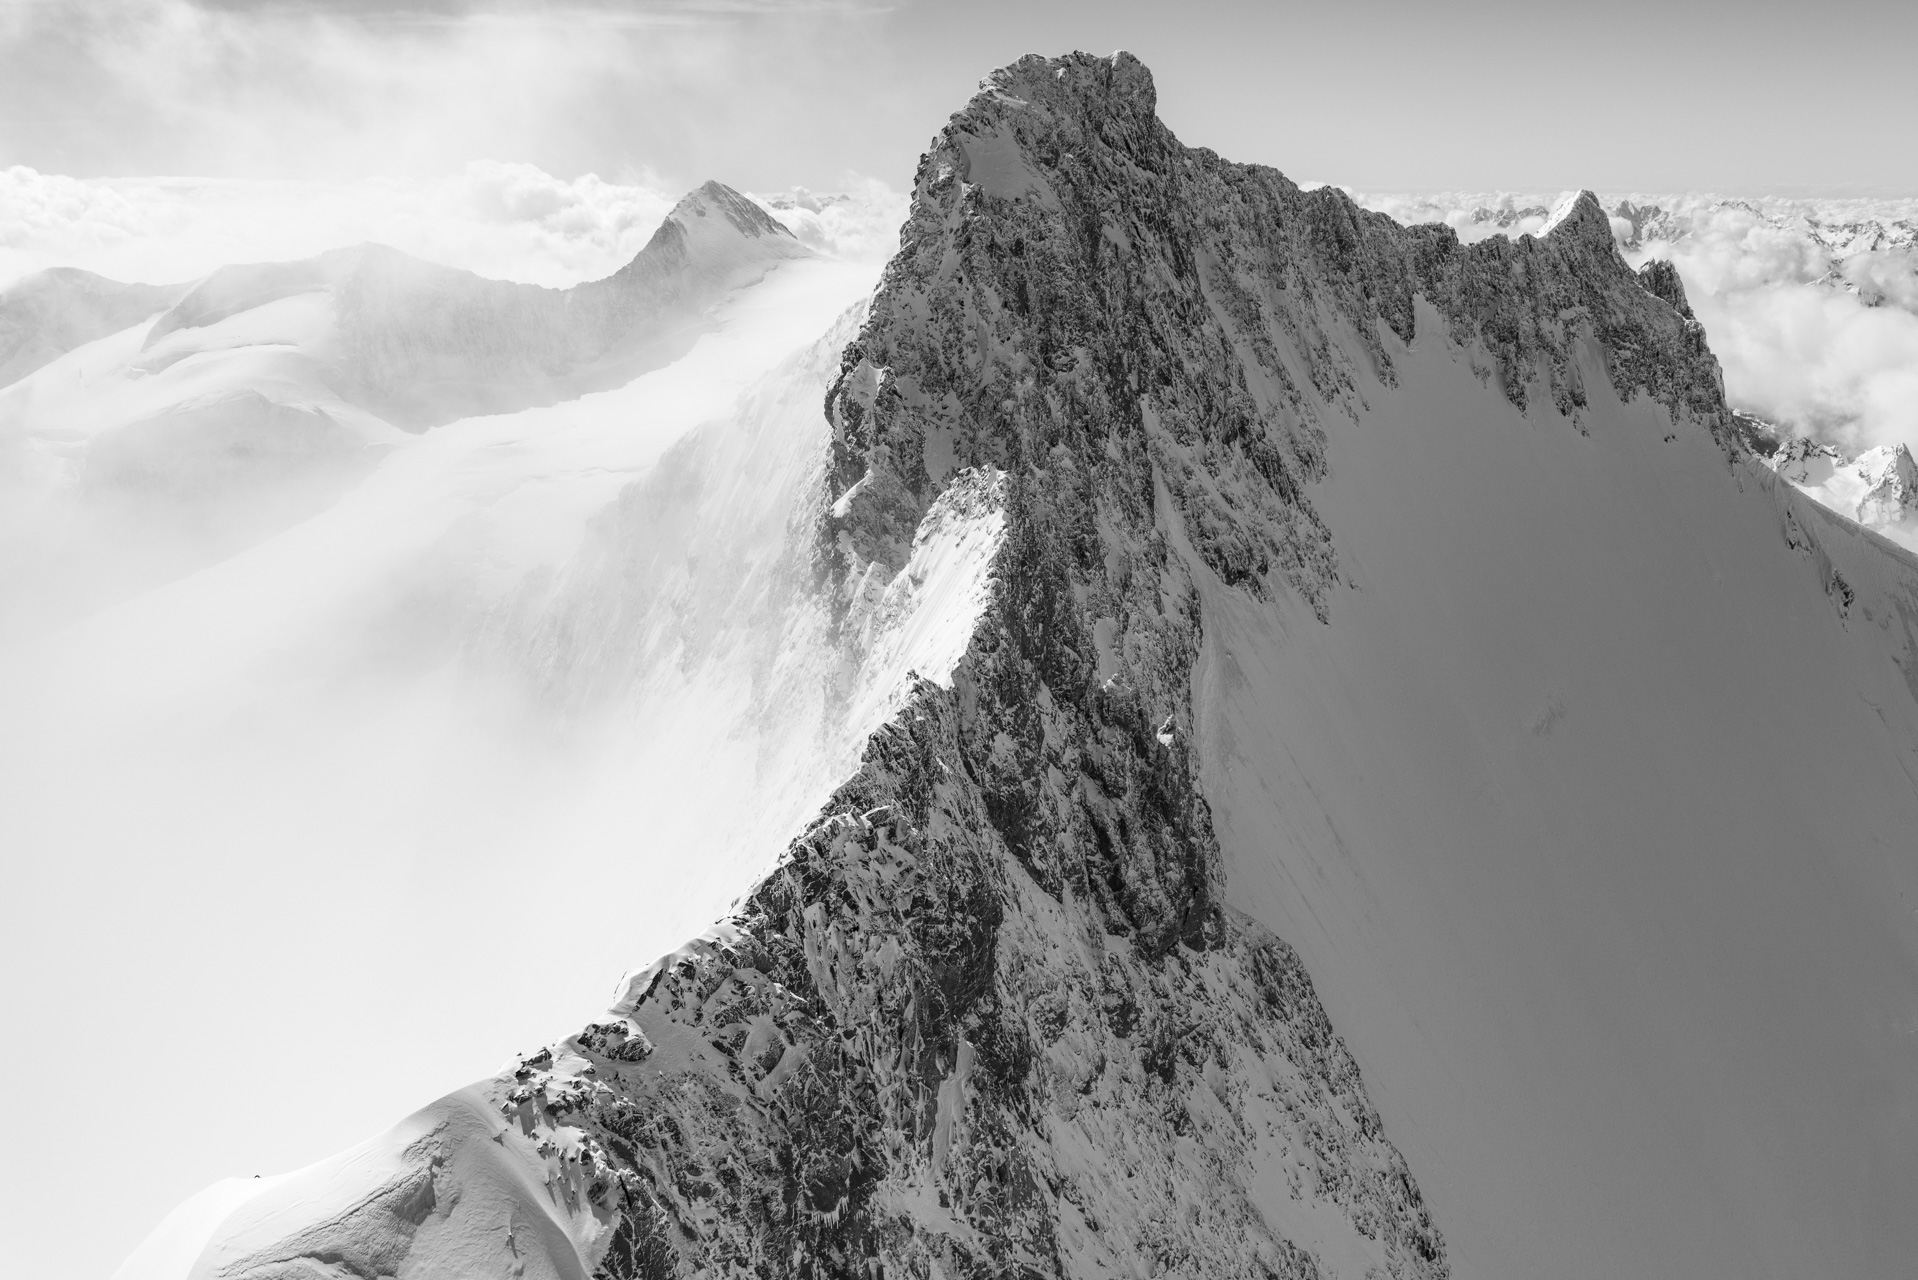 Black and white aerial view of mountains - Piz Bernina in Engadine